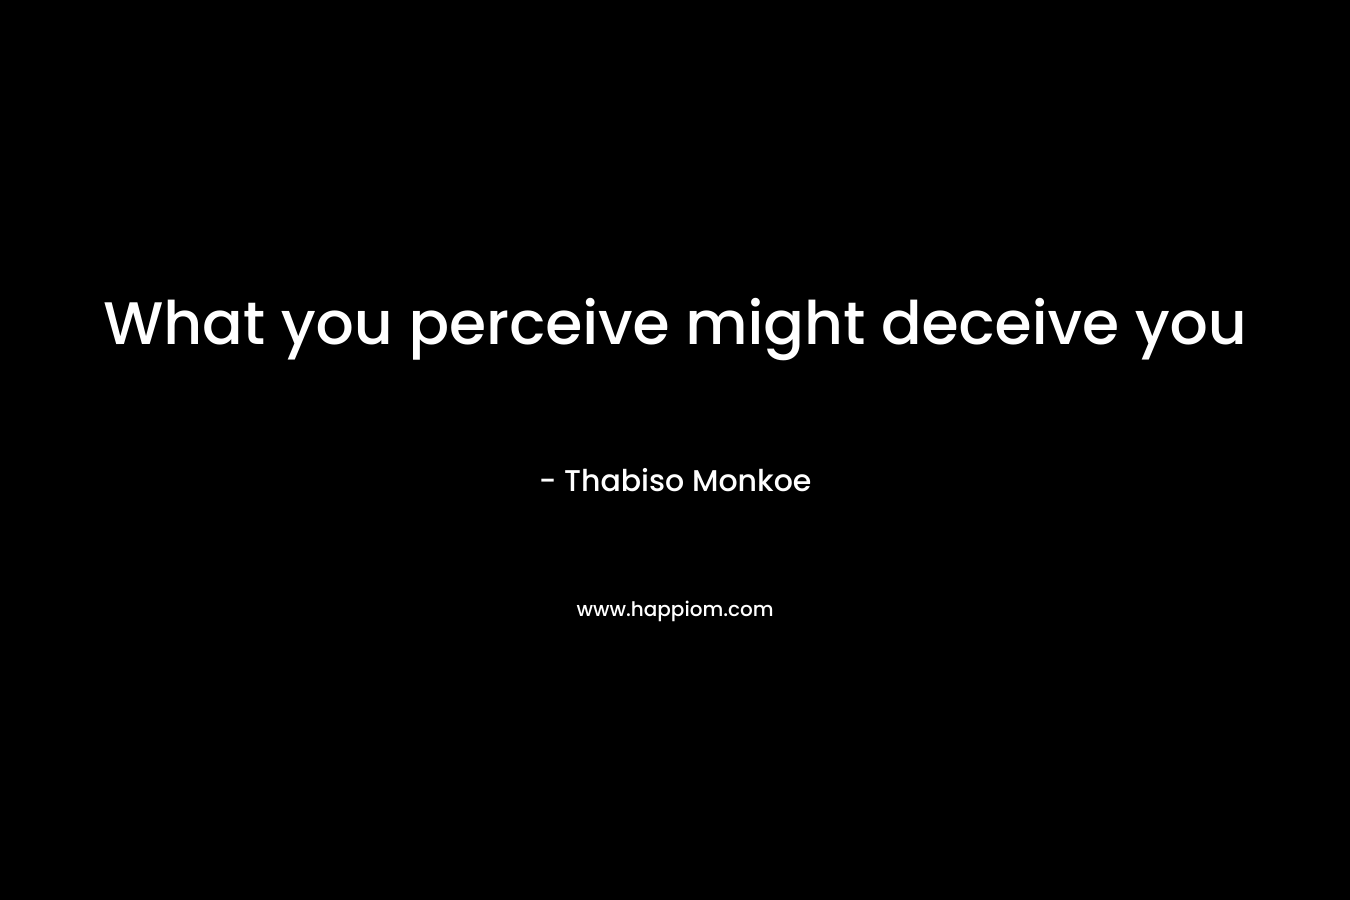 What you perceive might deceive you